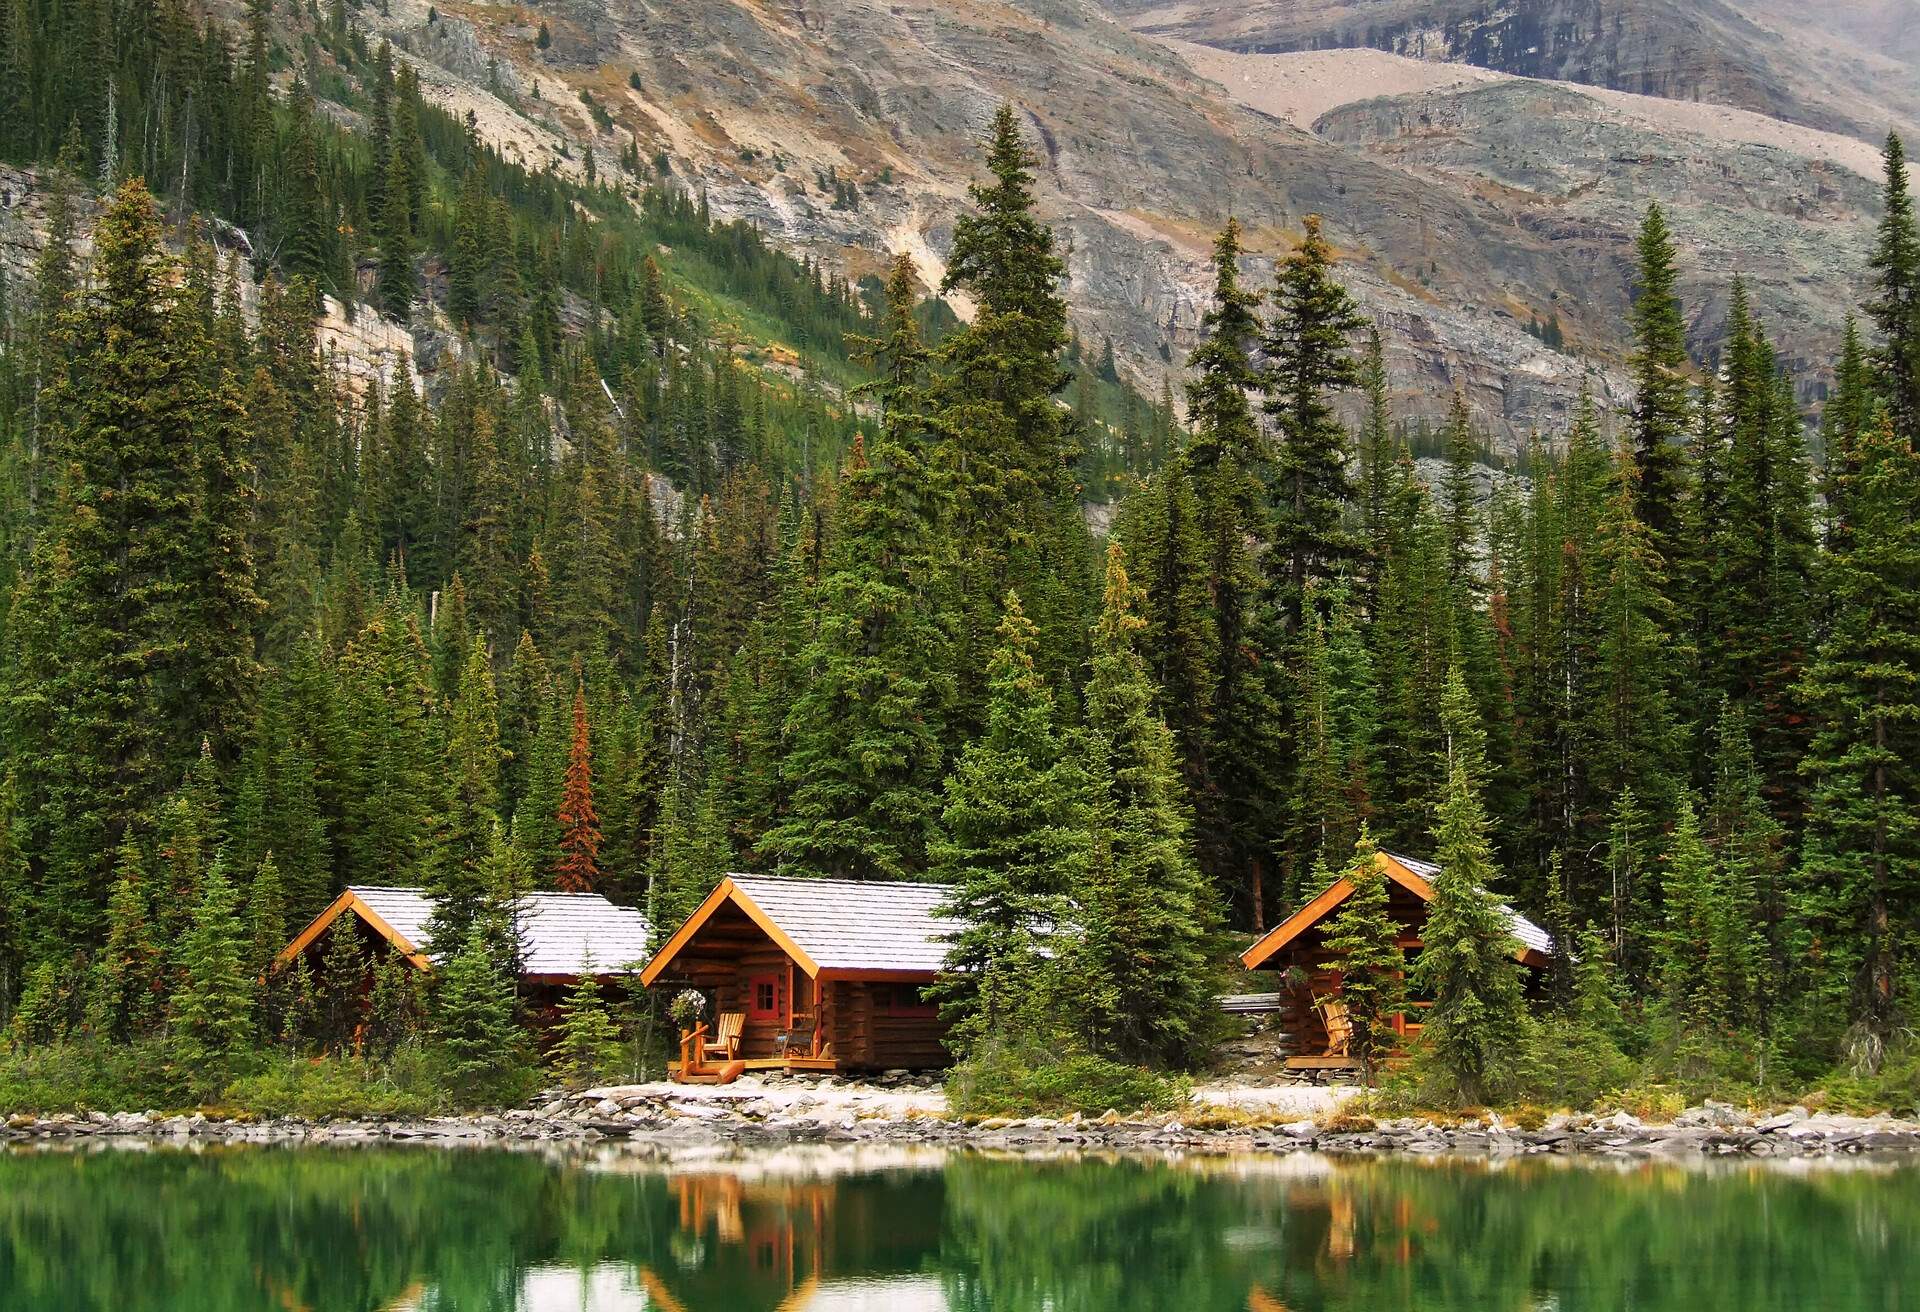 Log cabins by the lake with towering trees and rocky mountains.